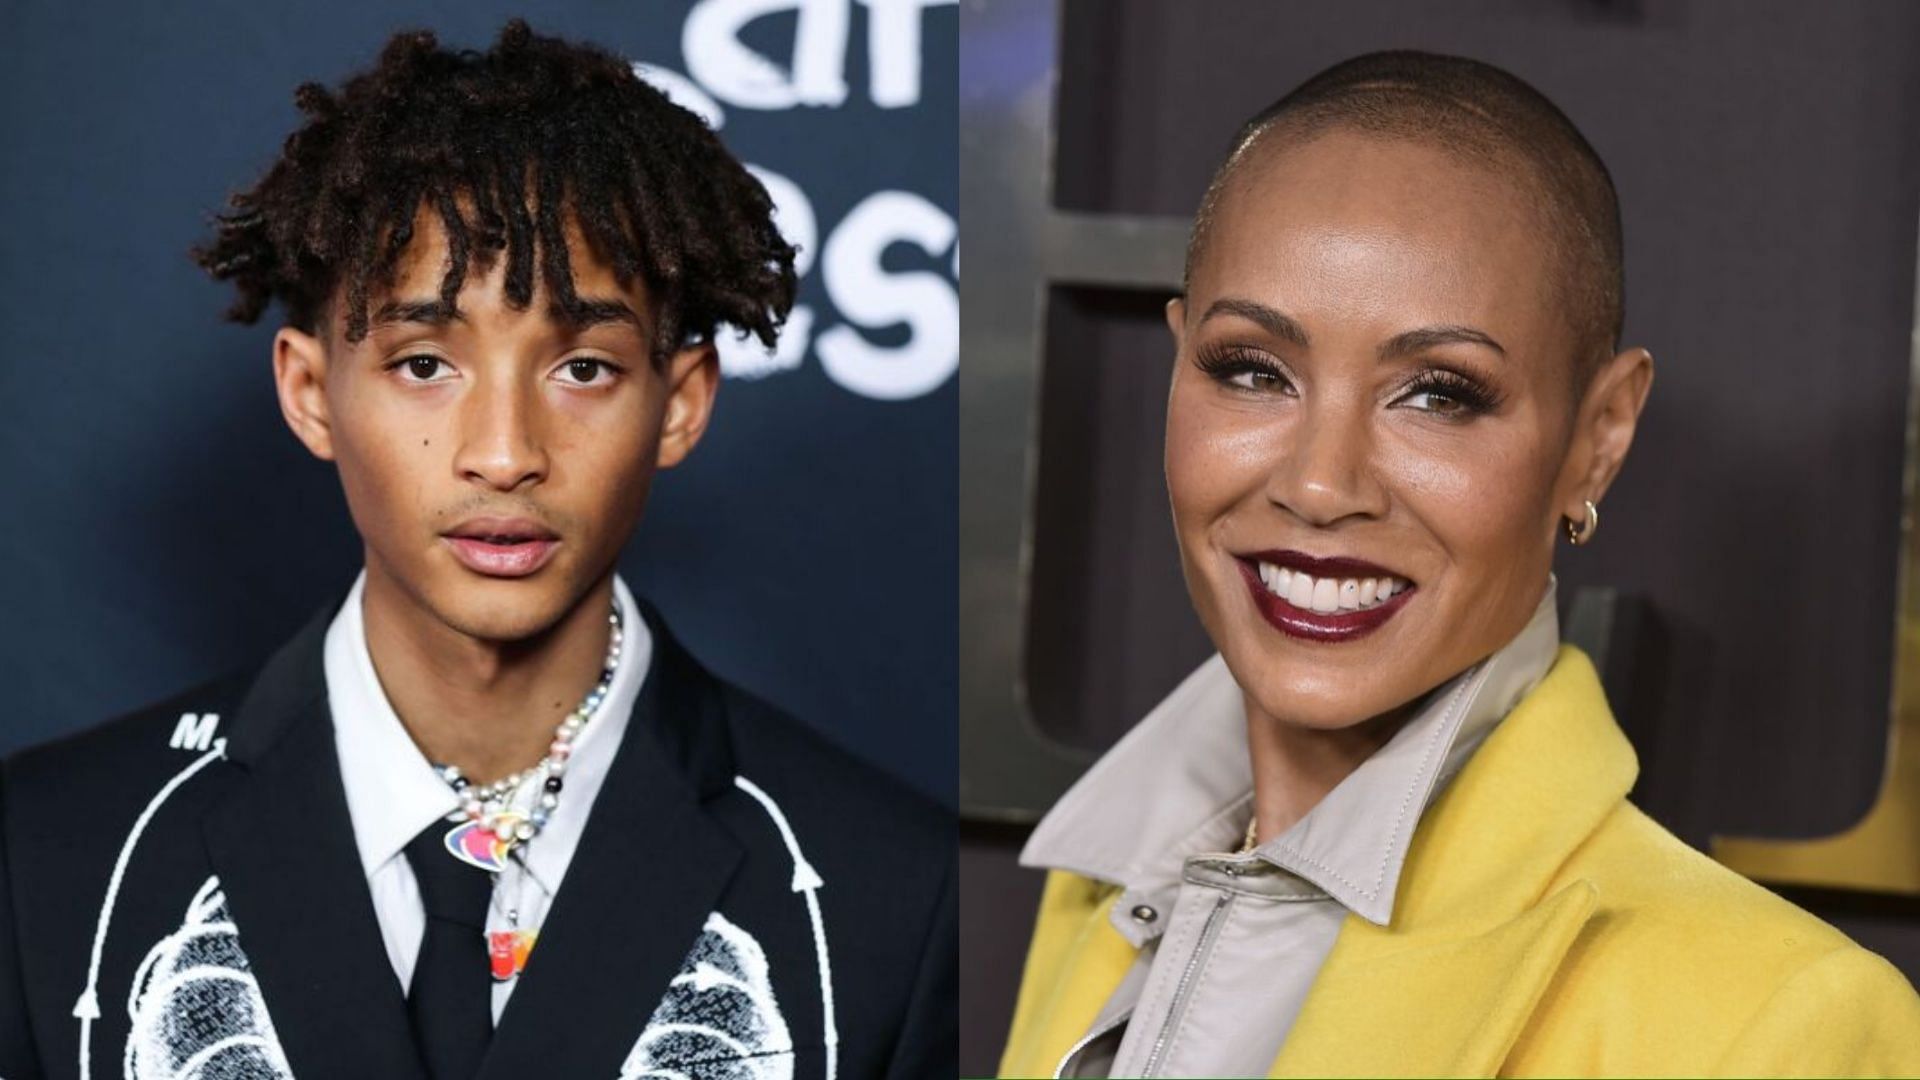 Jaden Smith sparks wild online reactions after sharing that his mother Jada Pinkett Smith introduced psychedelic drugs to the family. (Image via Getty Images)